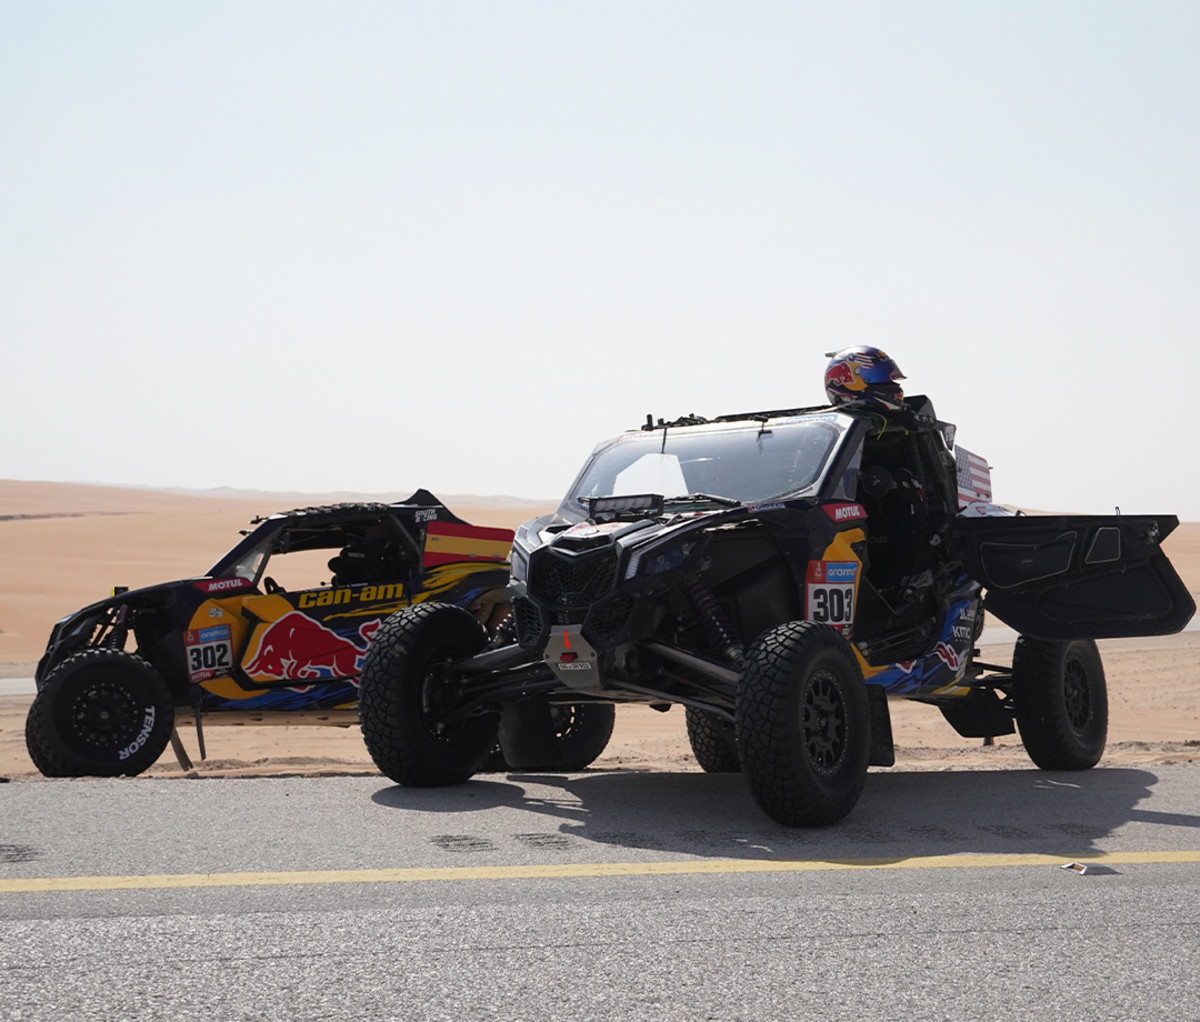 Two Dakar side by sides parked on a paved road with the desert in the background.